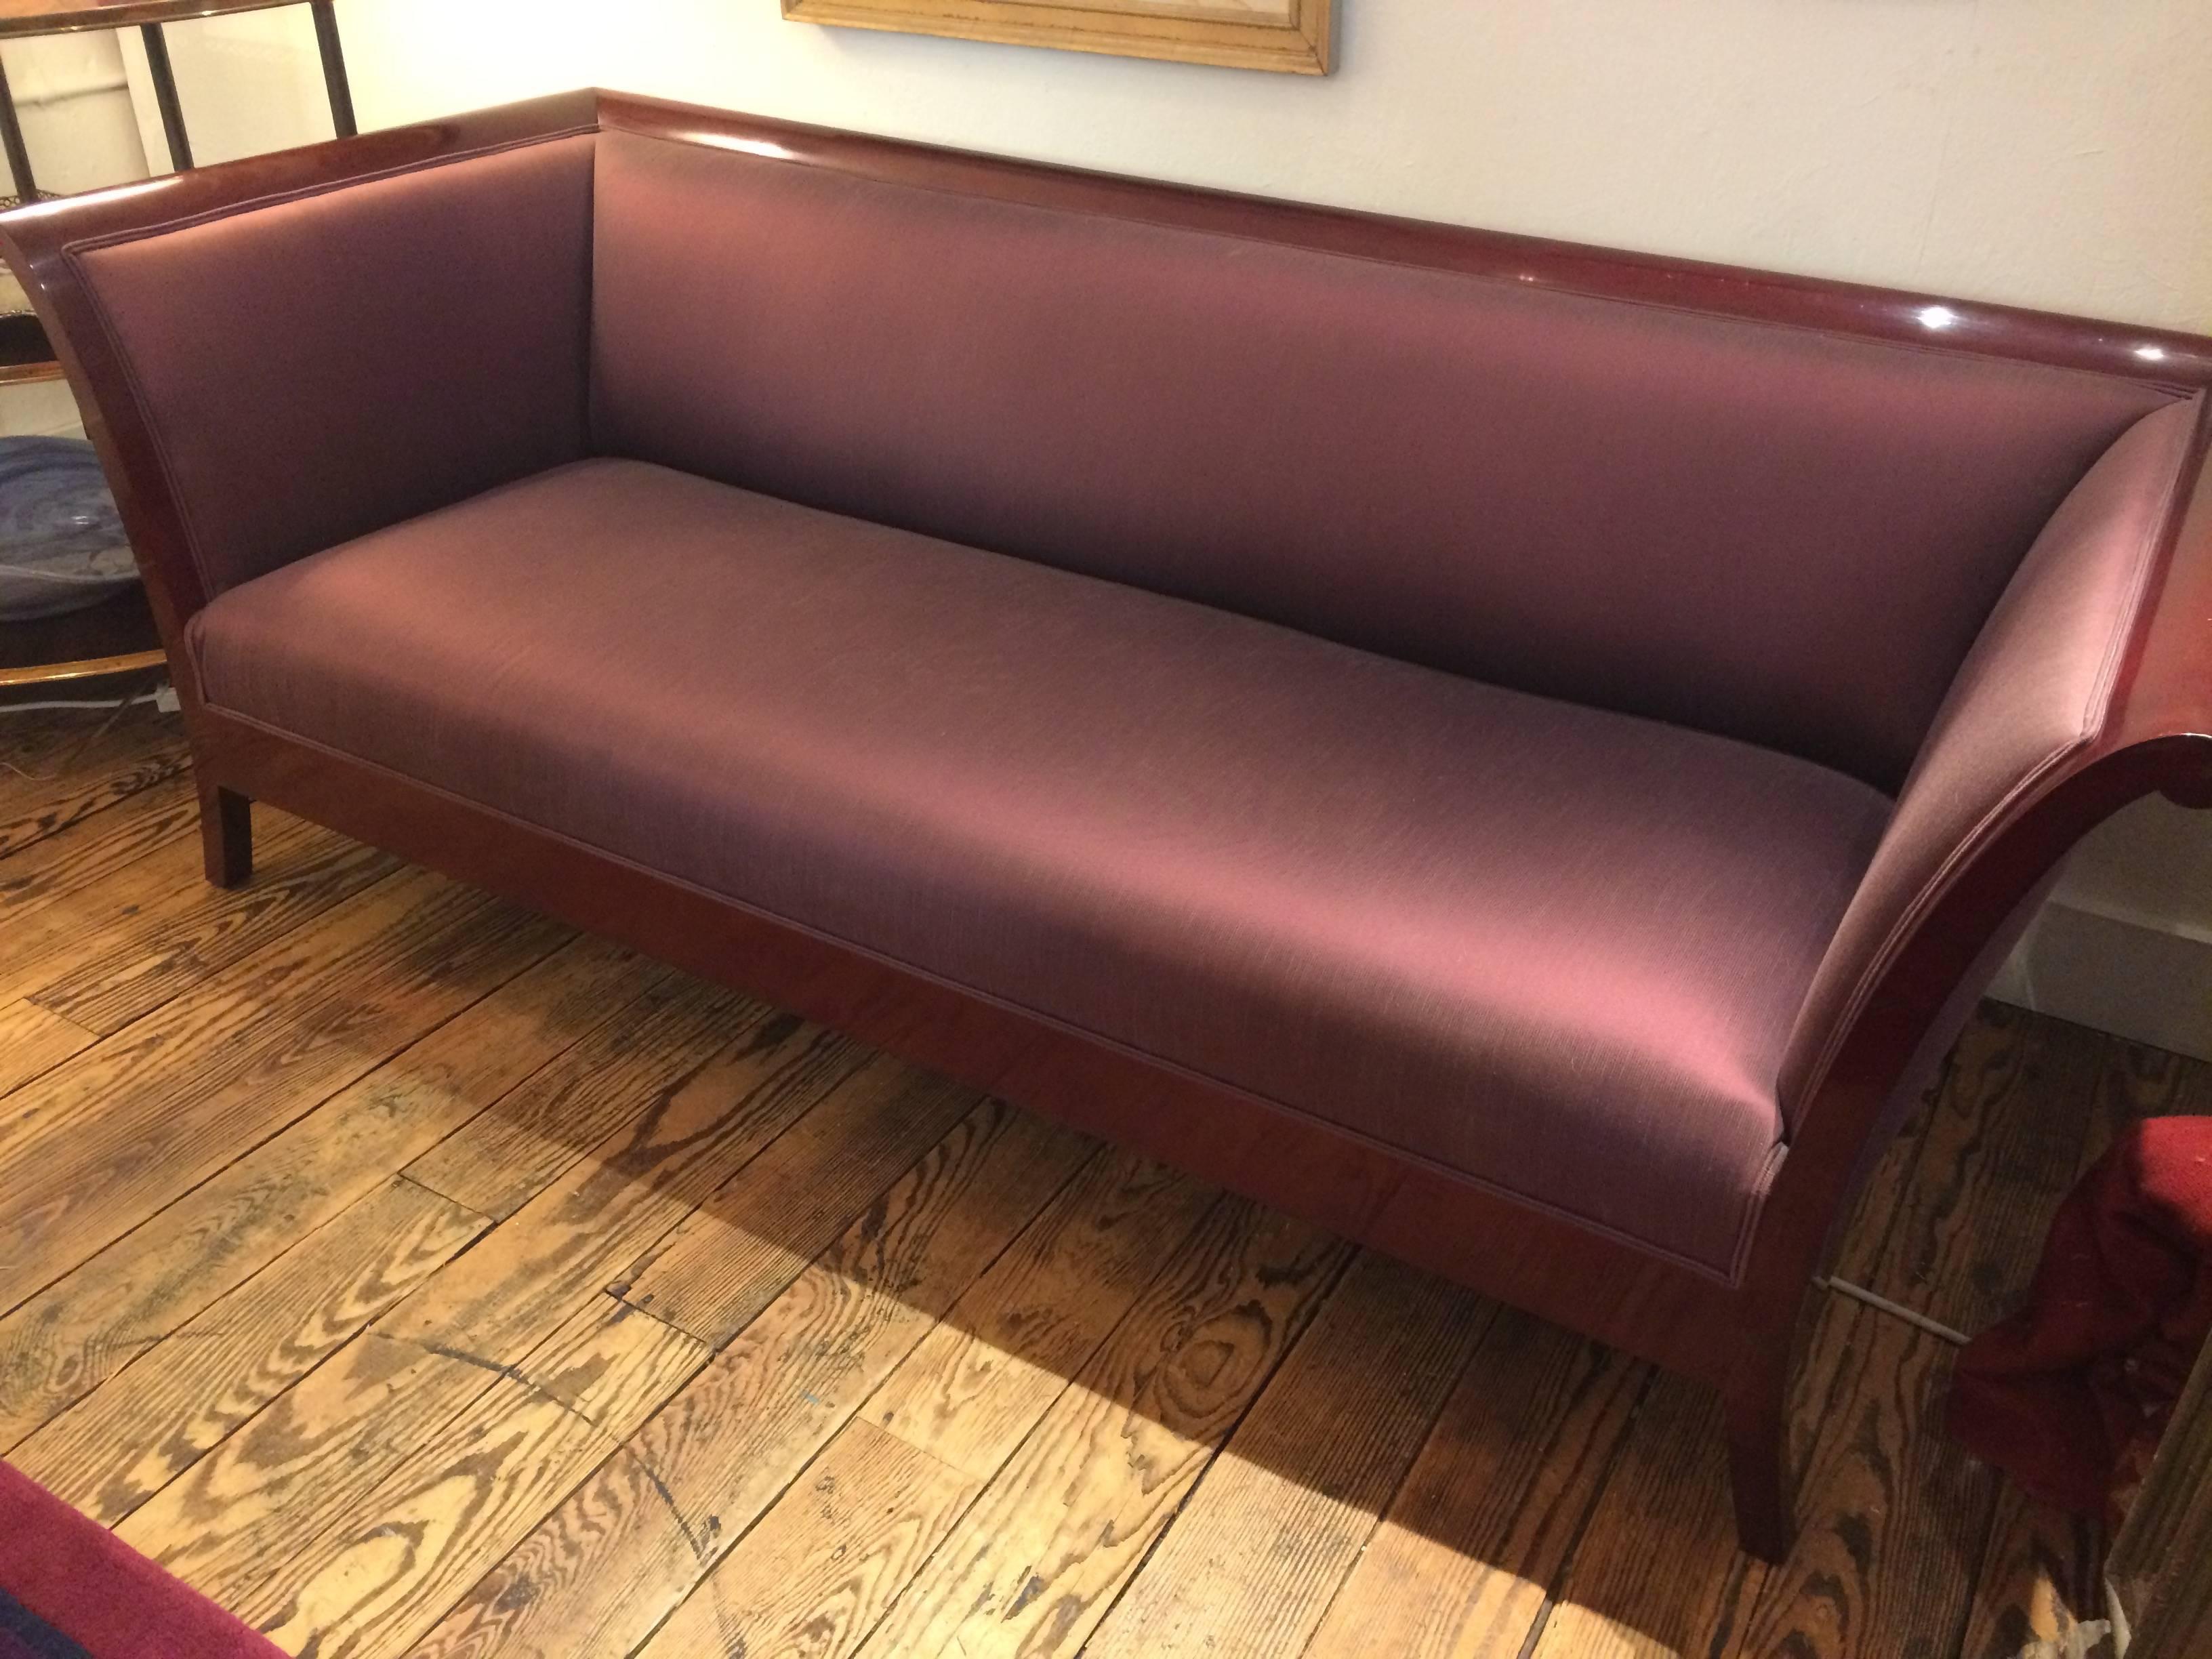 A pair of gorgeous sleek deco inspired sofas by Kenneth Winslow having high gloss cherry frames, upholstered in a purple mauve fabric that changes color depending on amount of direct sunlight. Firm very comfortable seating.
Measure: seat height 16,